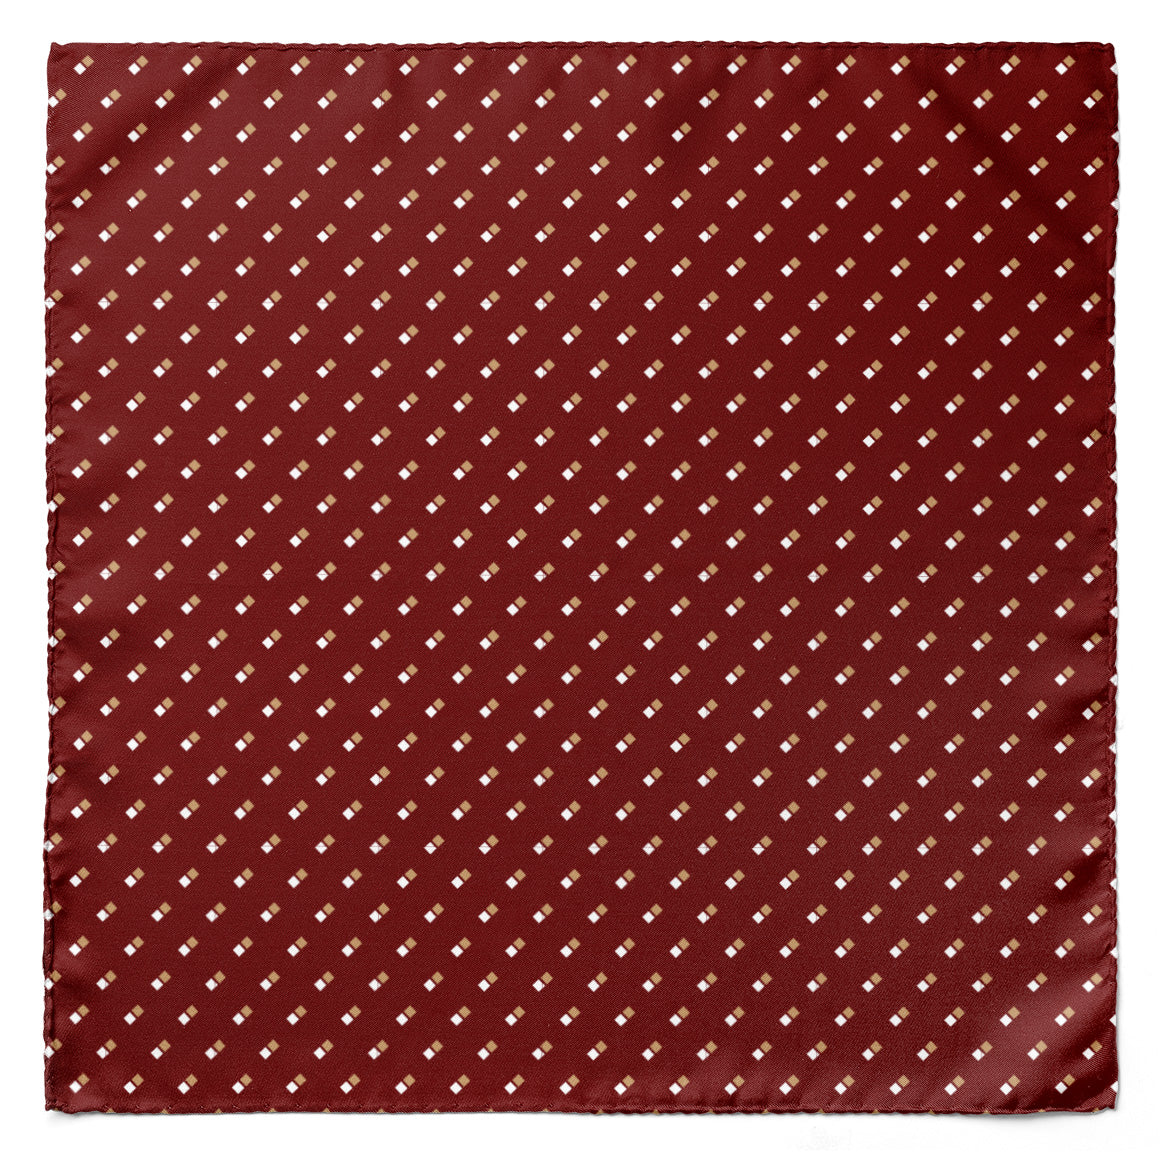 DOUBLE DOTTED MAROON SILK POCKET SQUARE